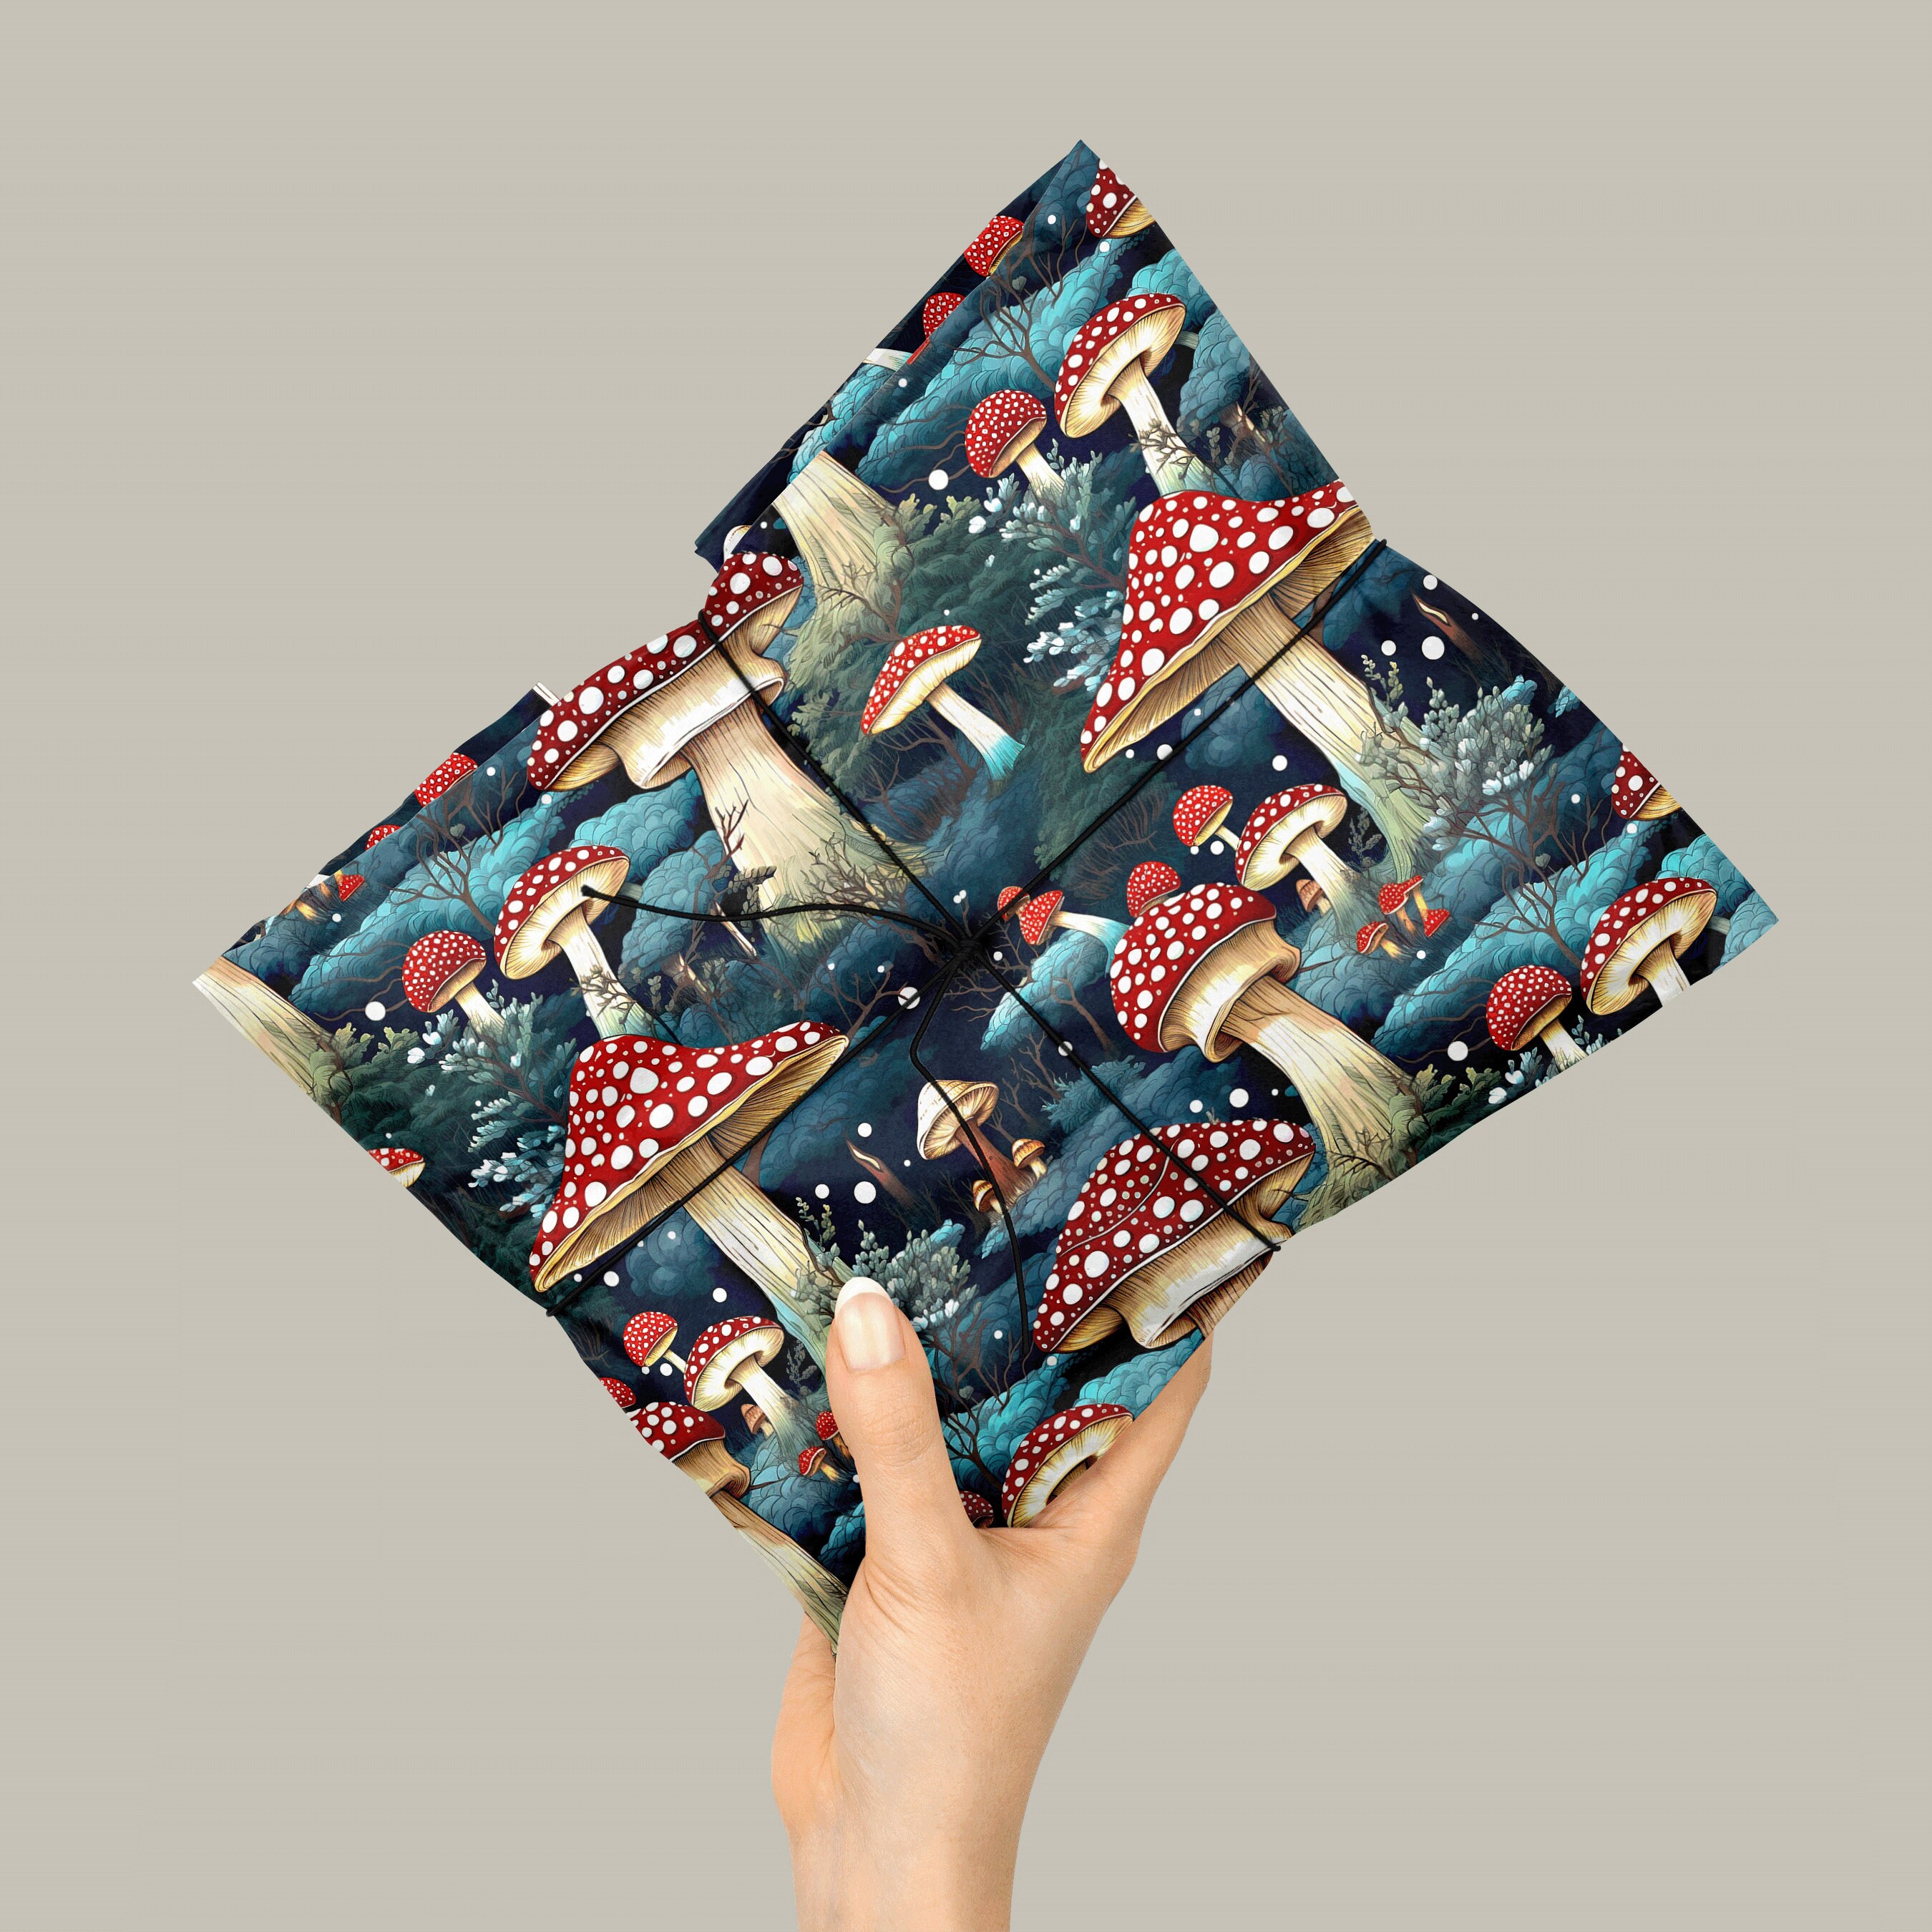 Woodland Mushroom Christmas - Wrapping Paper Sheets – Green Home & Co.